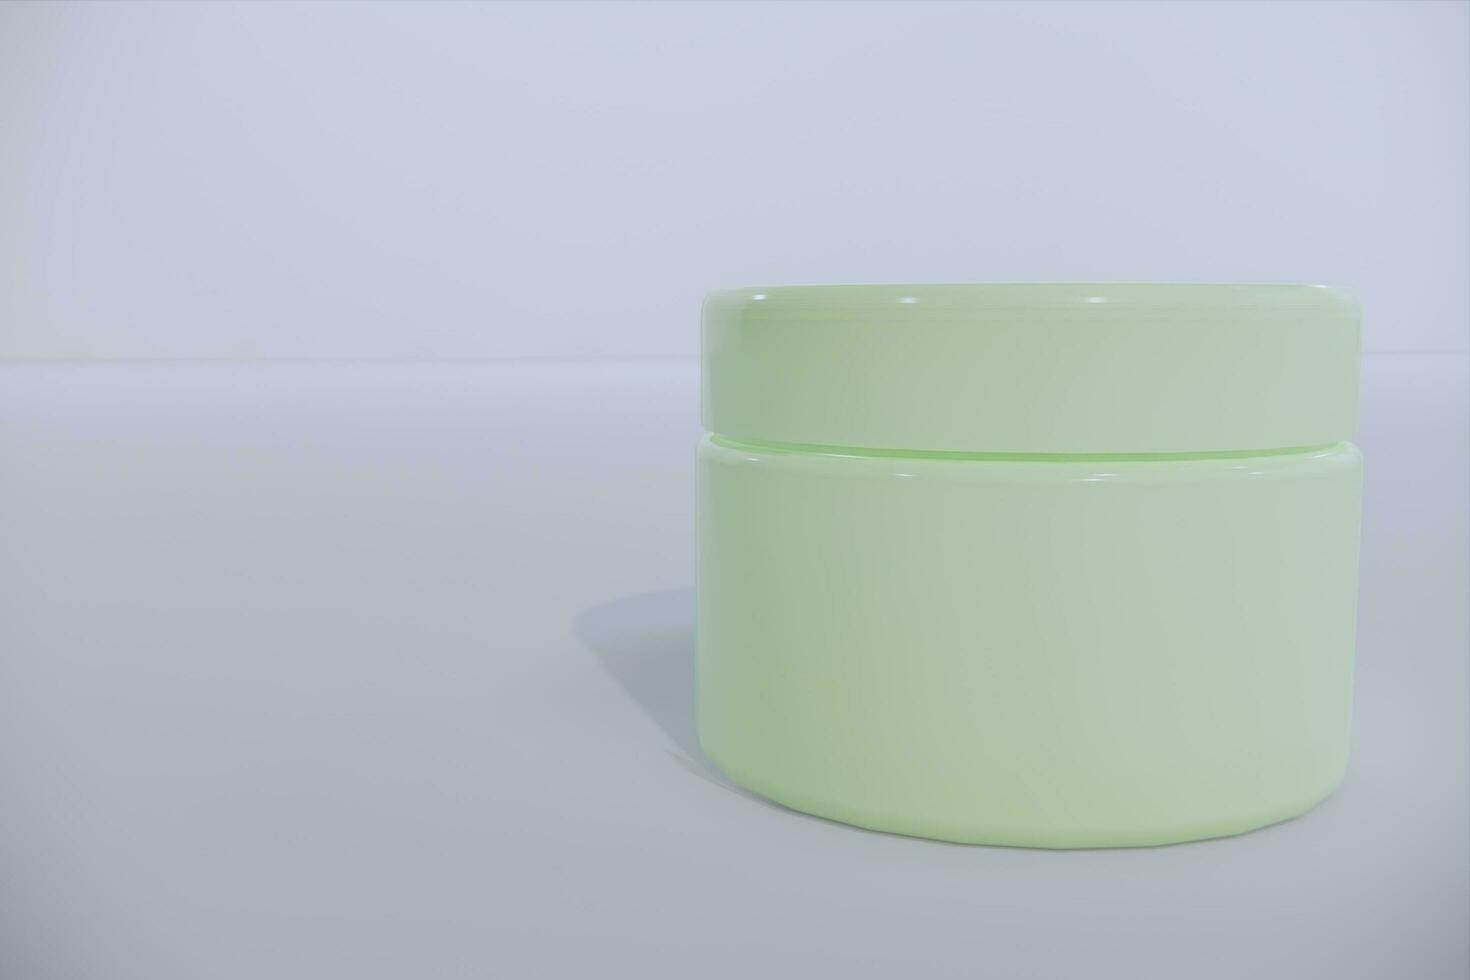 Green blank glossy cosmetic plastic jar mock up template on isolated white background, cosmetic container for body cream, gel, butter, bath salt, skin care, powder. 3D illustration photo